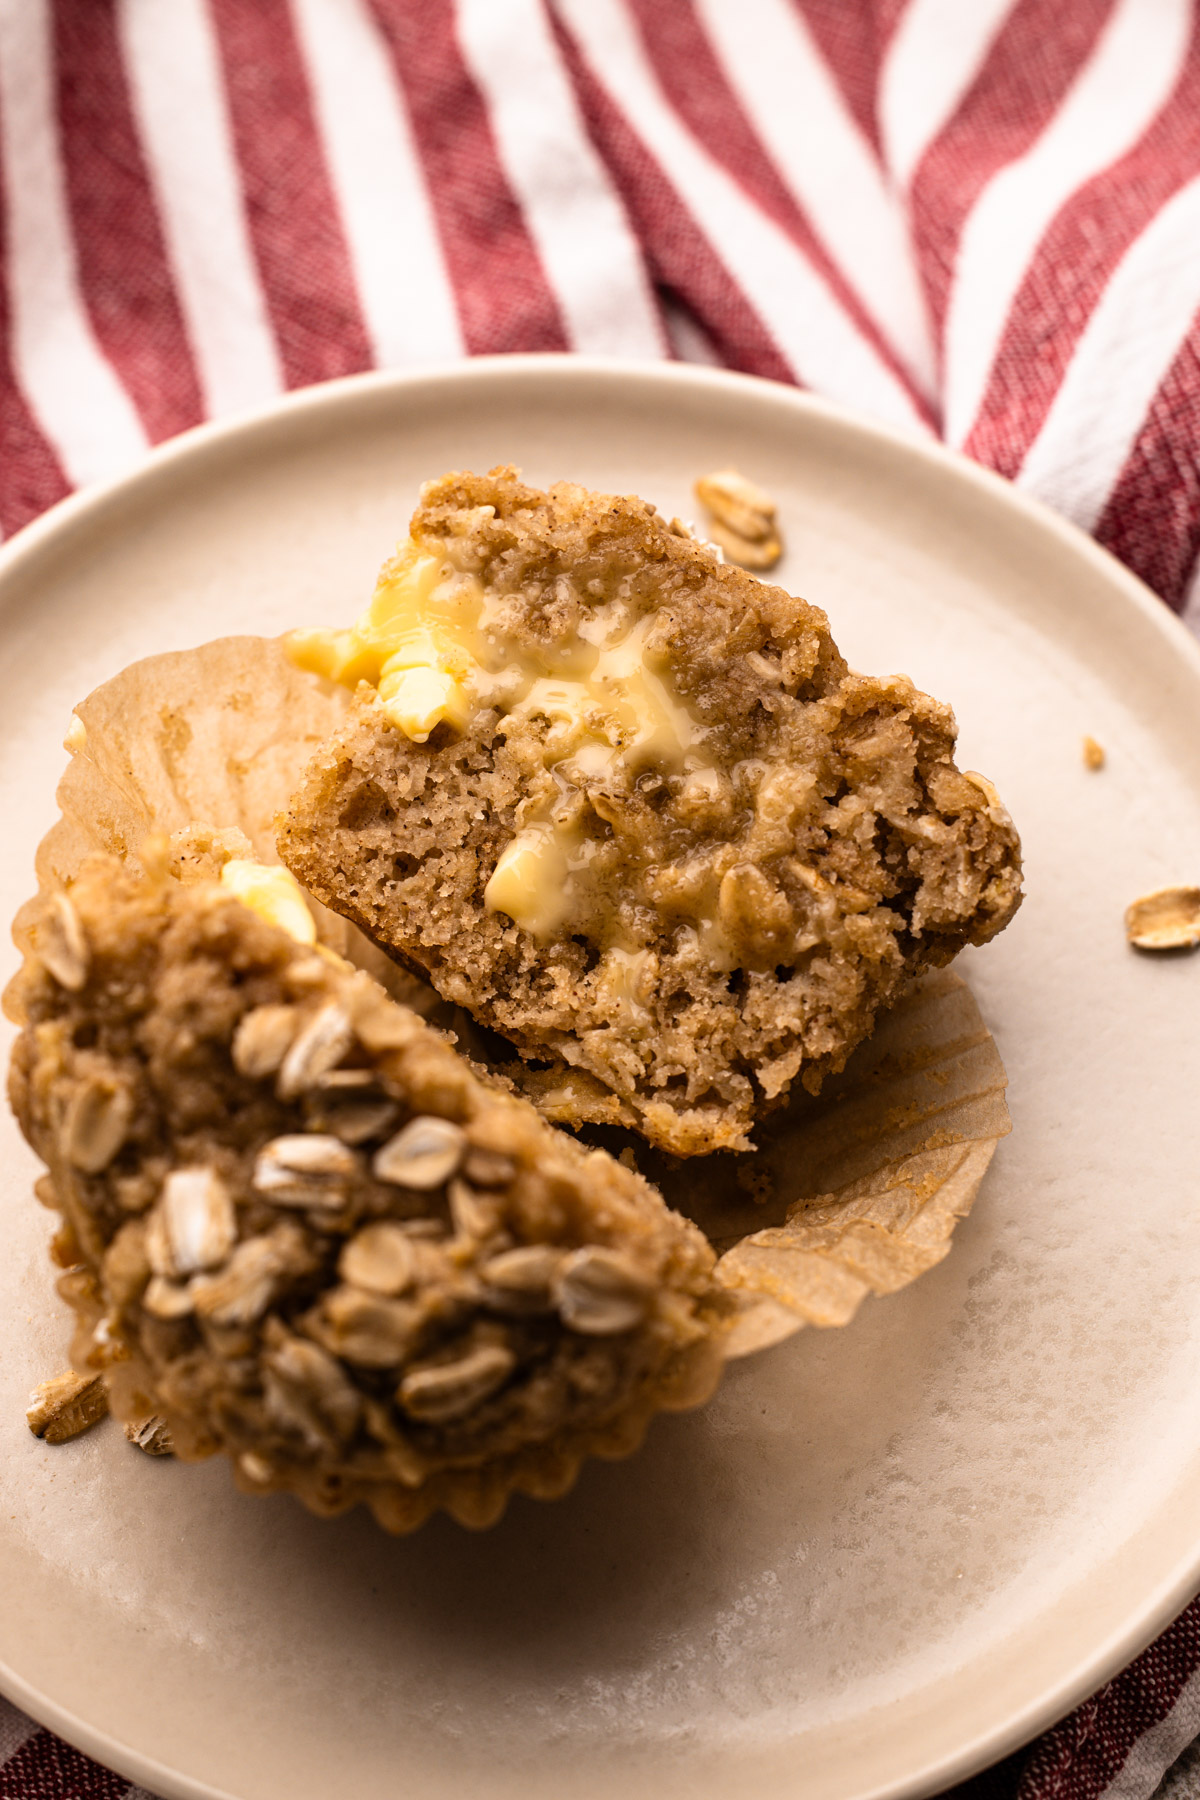 A baked wholesome apple muffin cut in half and spread with melting butter on a plate.